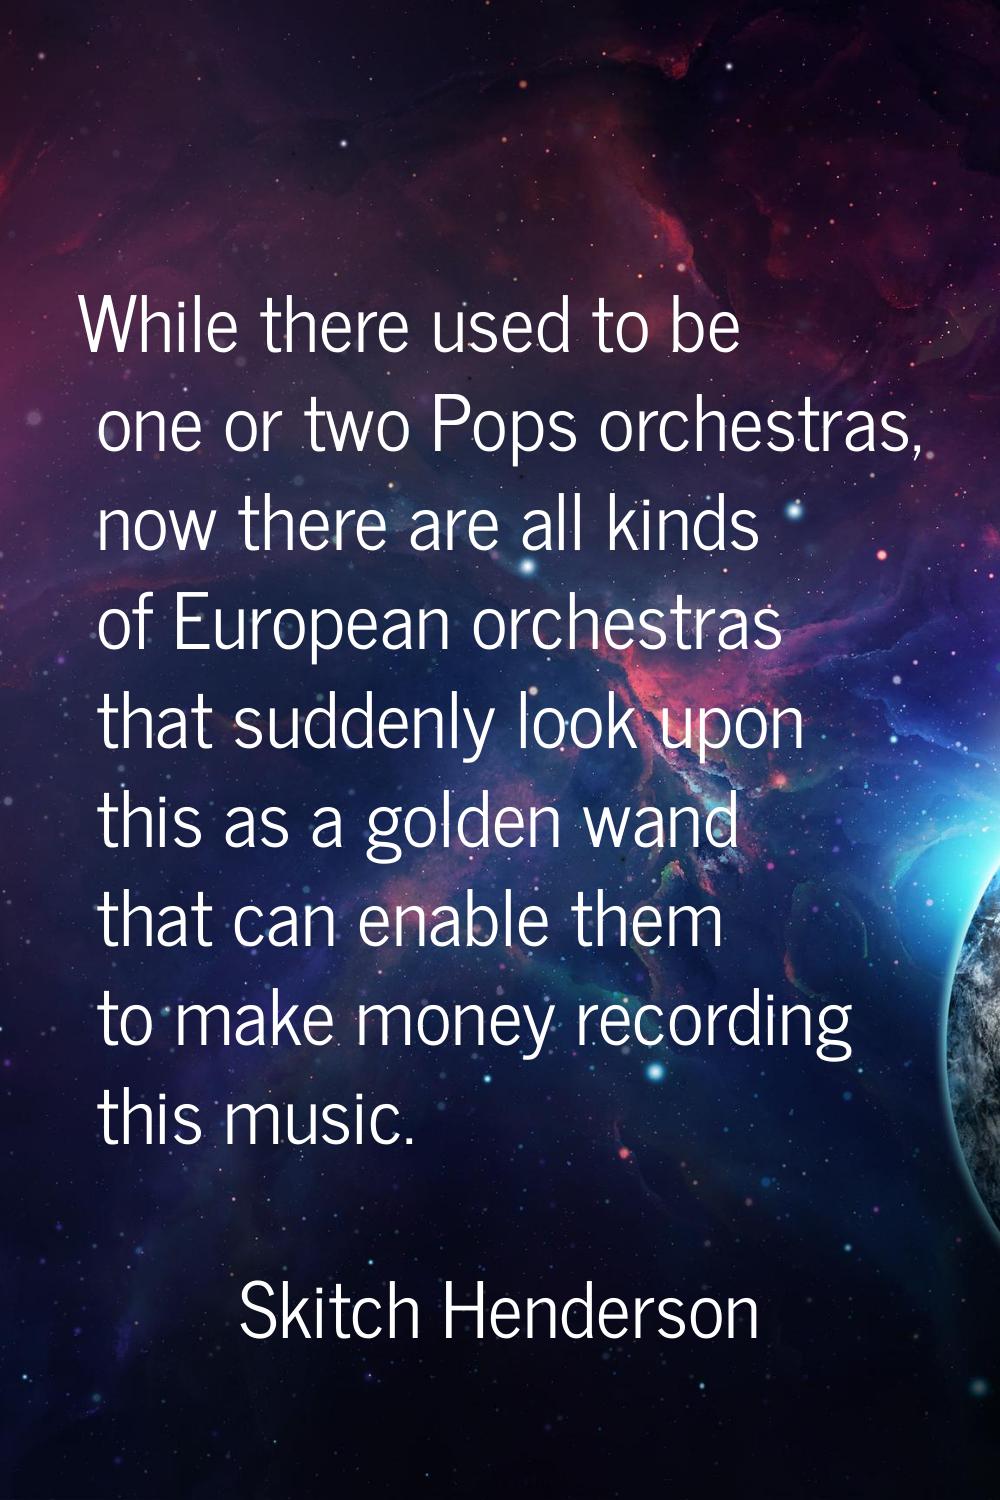 While there used to be one or two Pops orchestras, now there are all kinds of European orchestras t